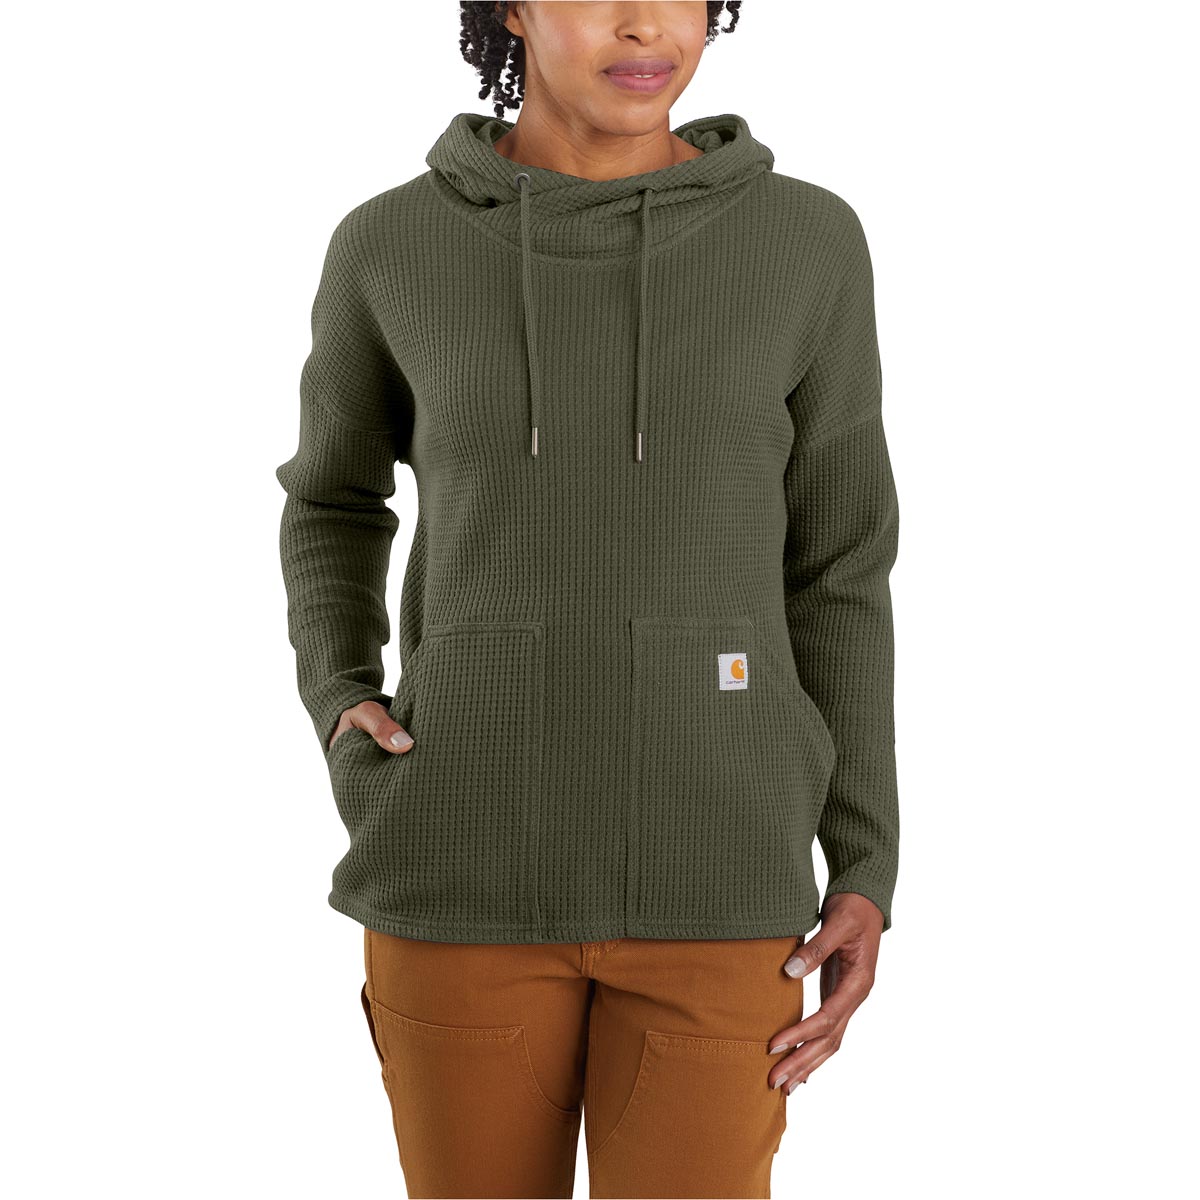 Carhartt Women's Relaxed Fit Heavyweight LS Hooded Thermal Shirt